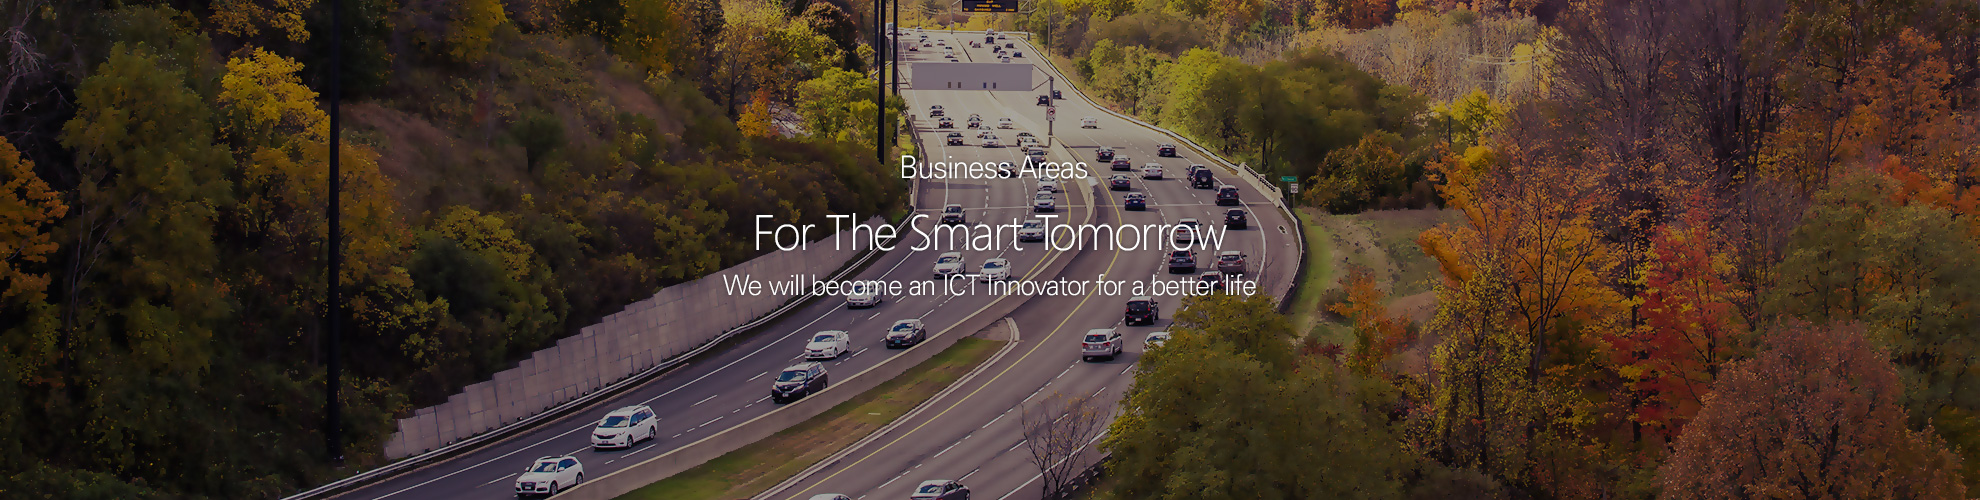 Business Areas - For The Smart Tomorrow We will become an ICT Innovator for a better life.